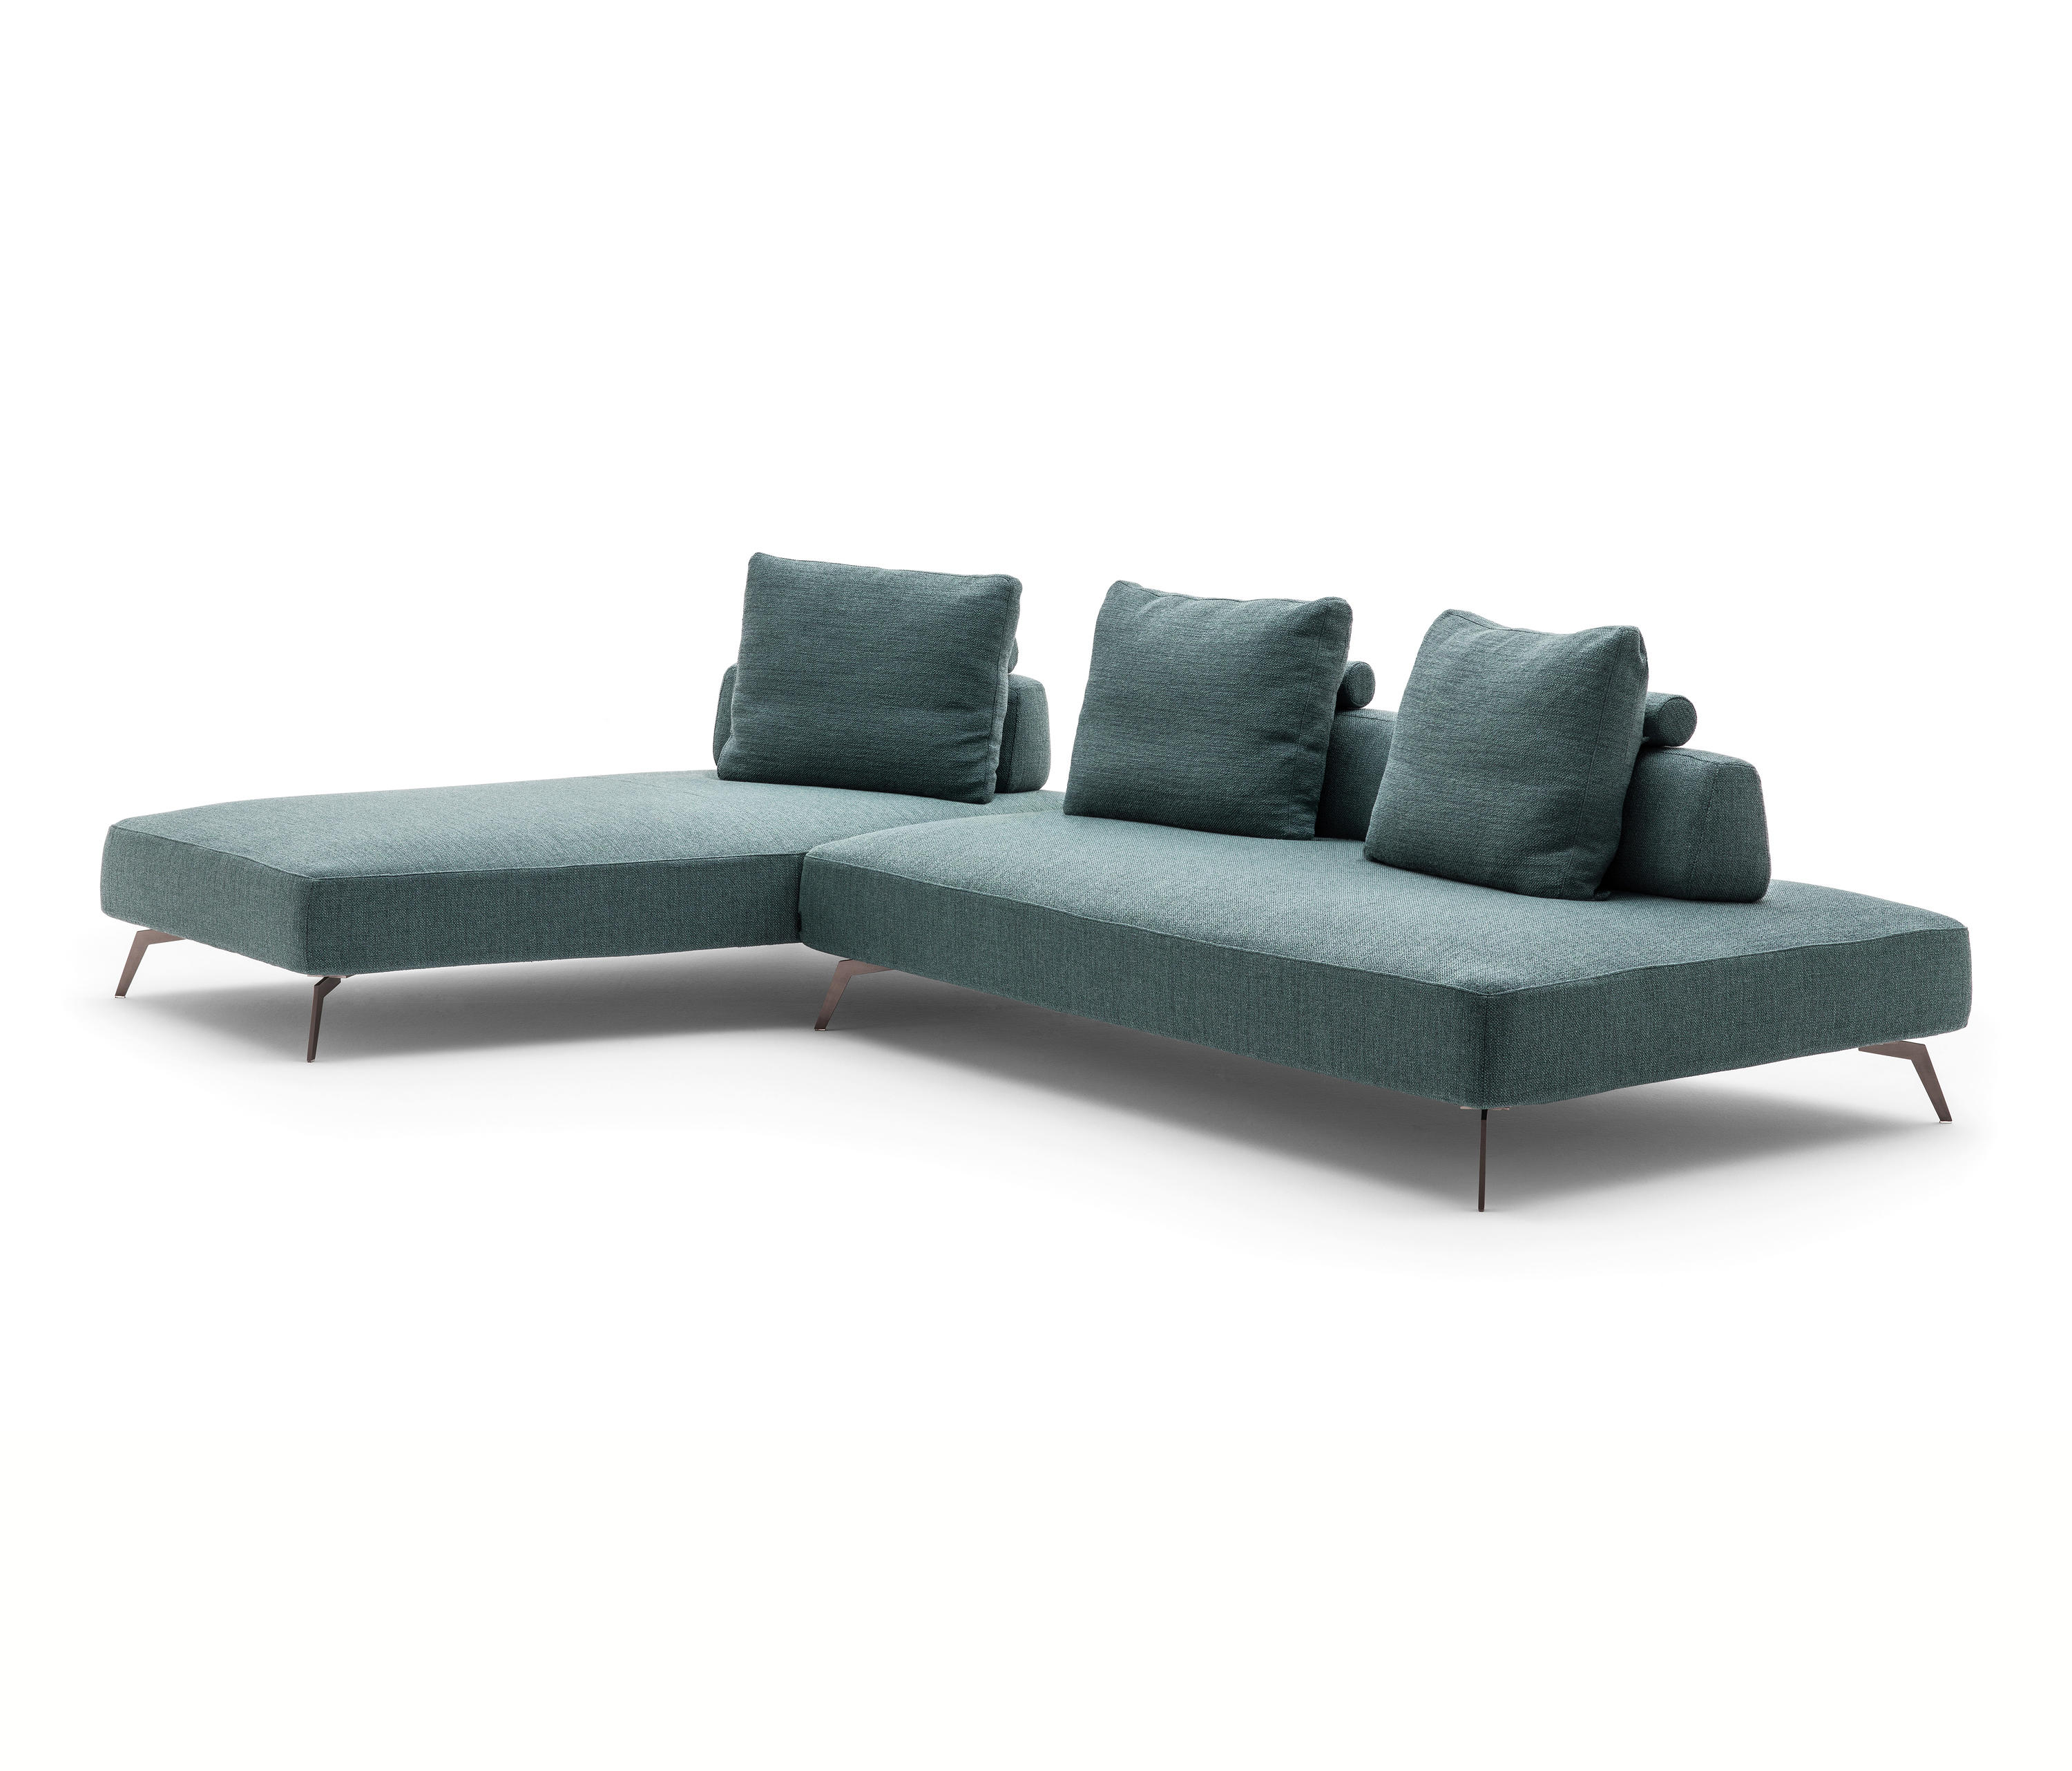 FREEDOM - Sofas from Alberta Pacific Furniture | Architonic